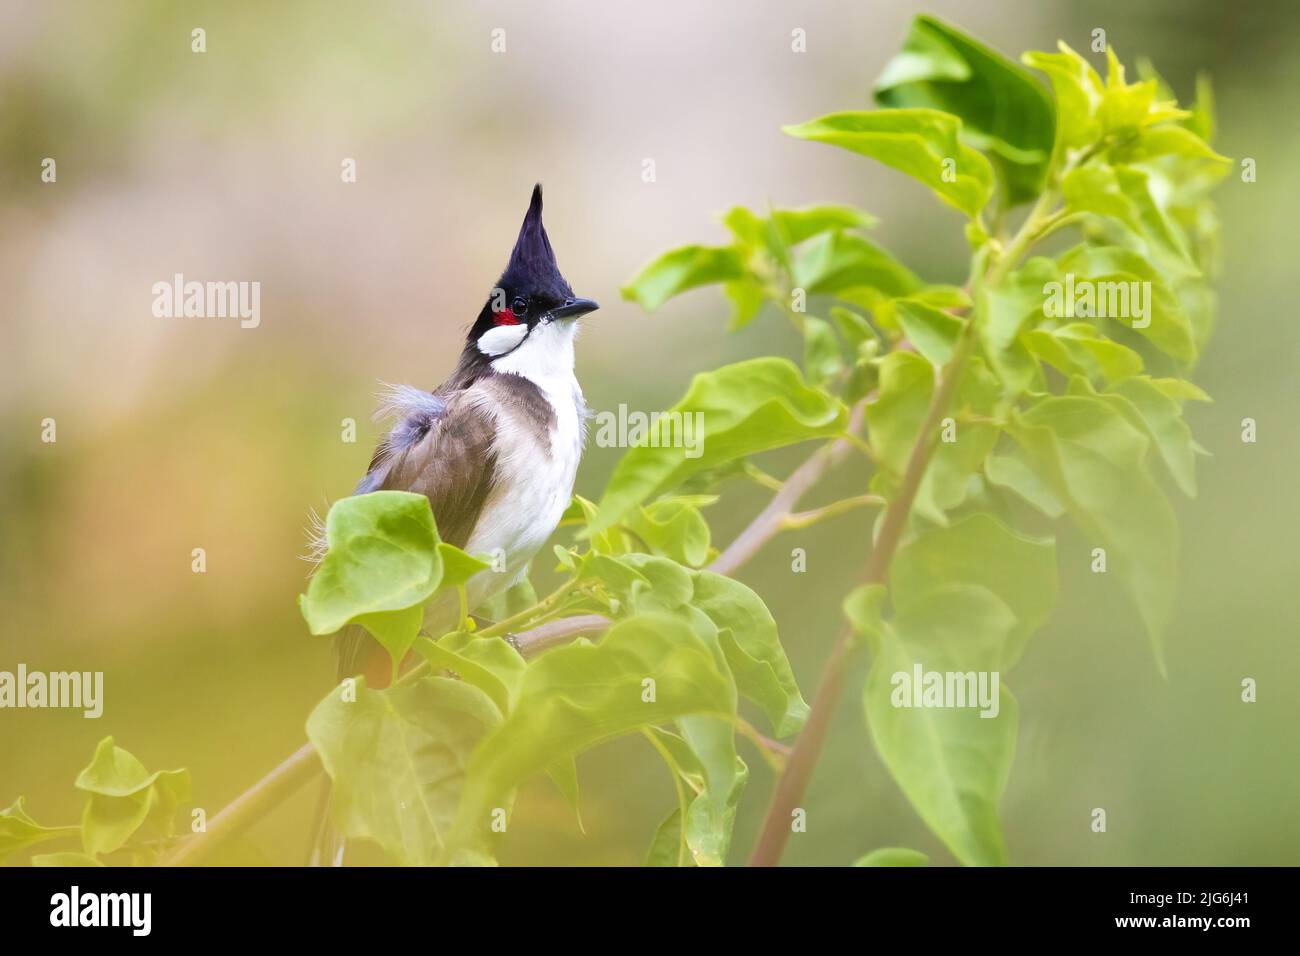 Red-whiskered bulbul Pycnonotus jocosus standing on a tree branch, Thailand Stock Photo